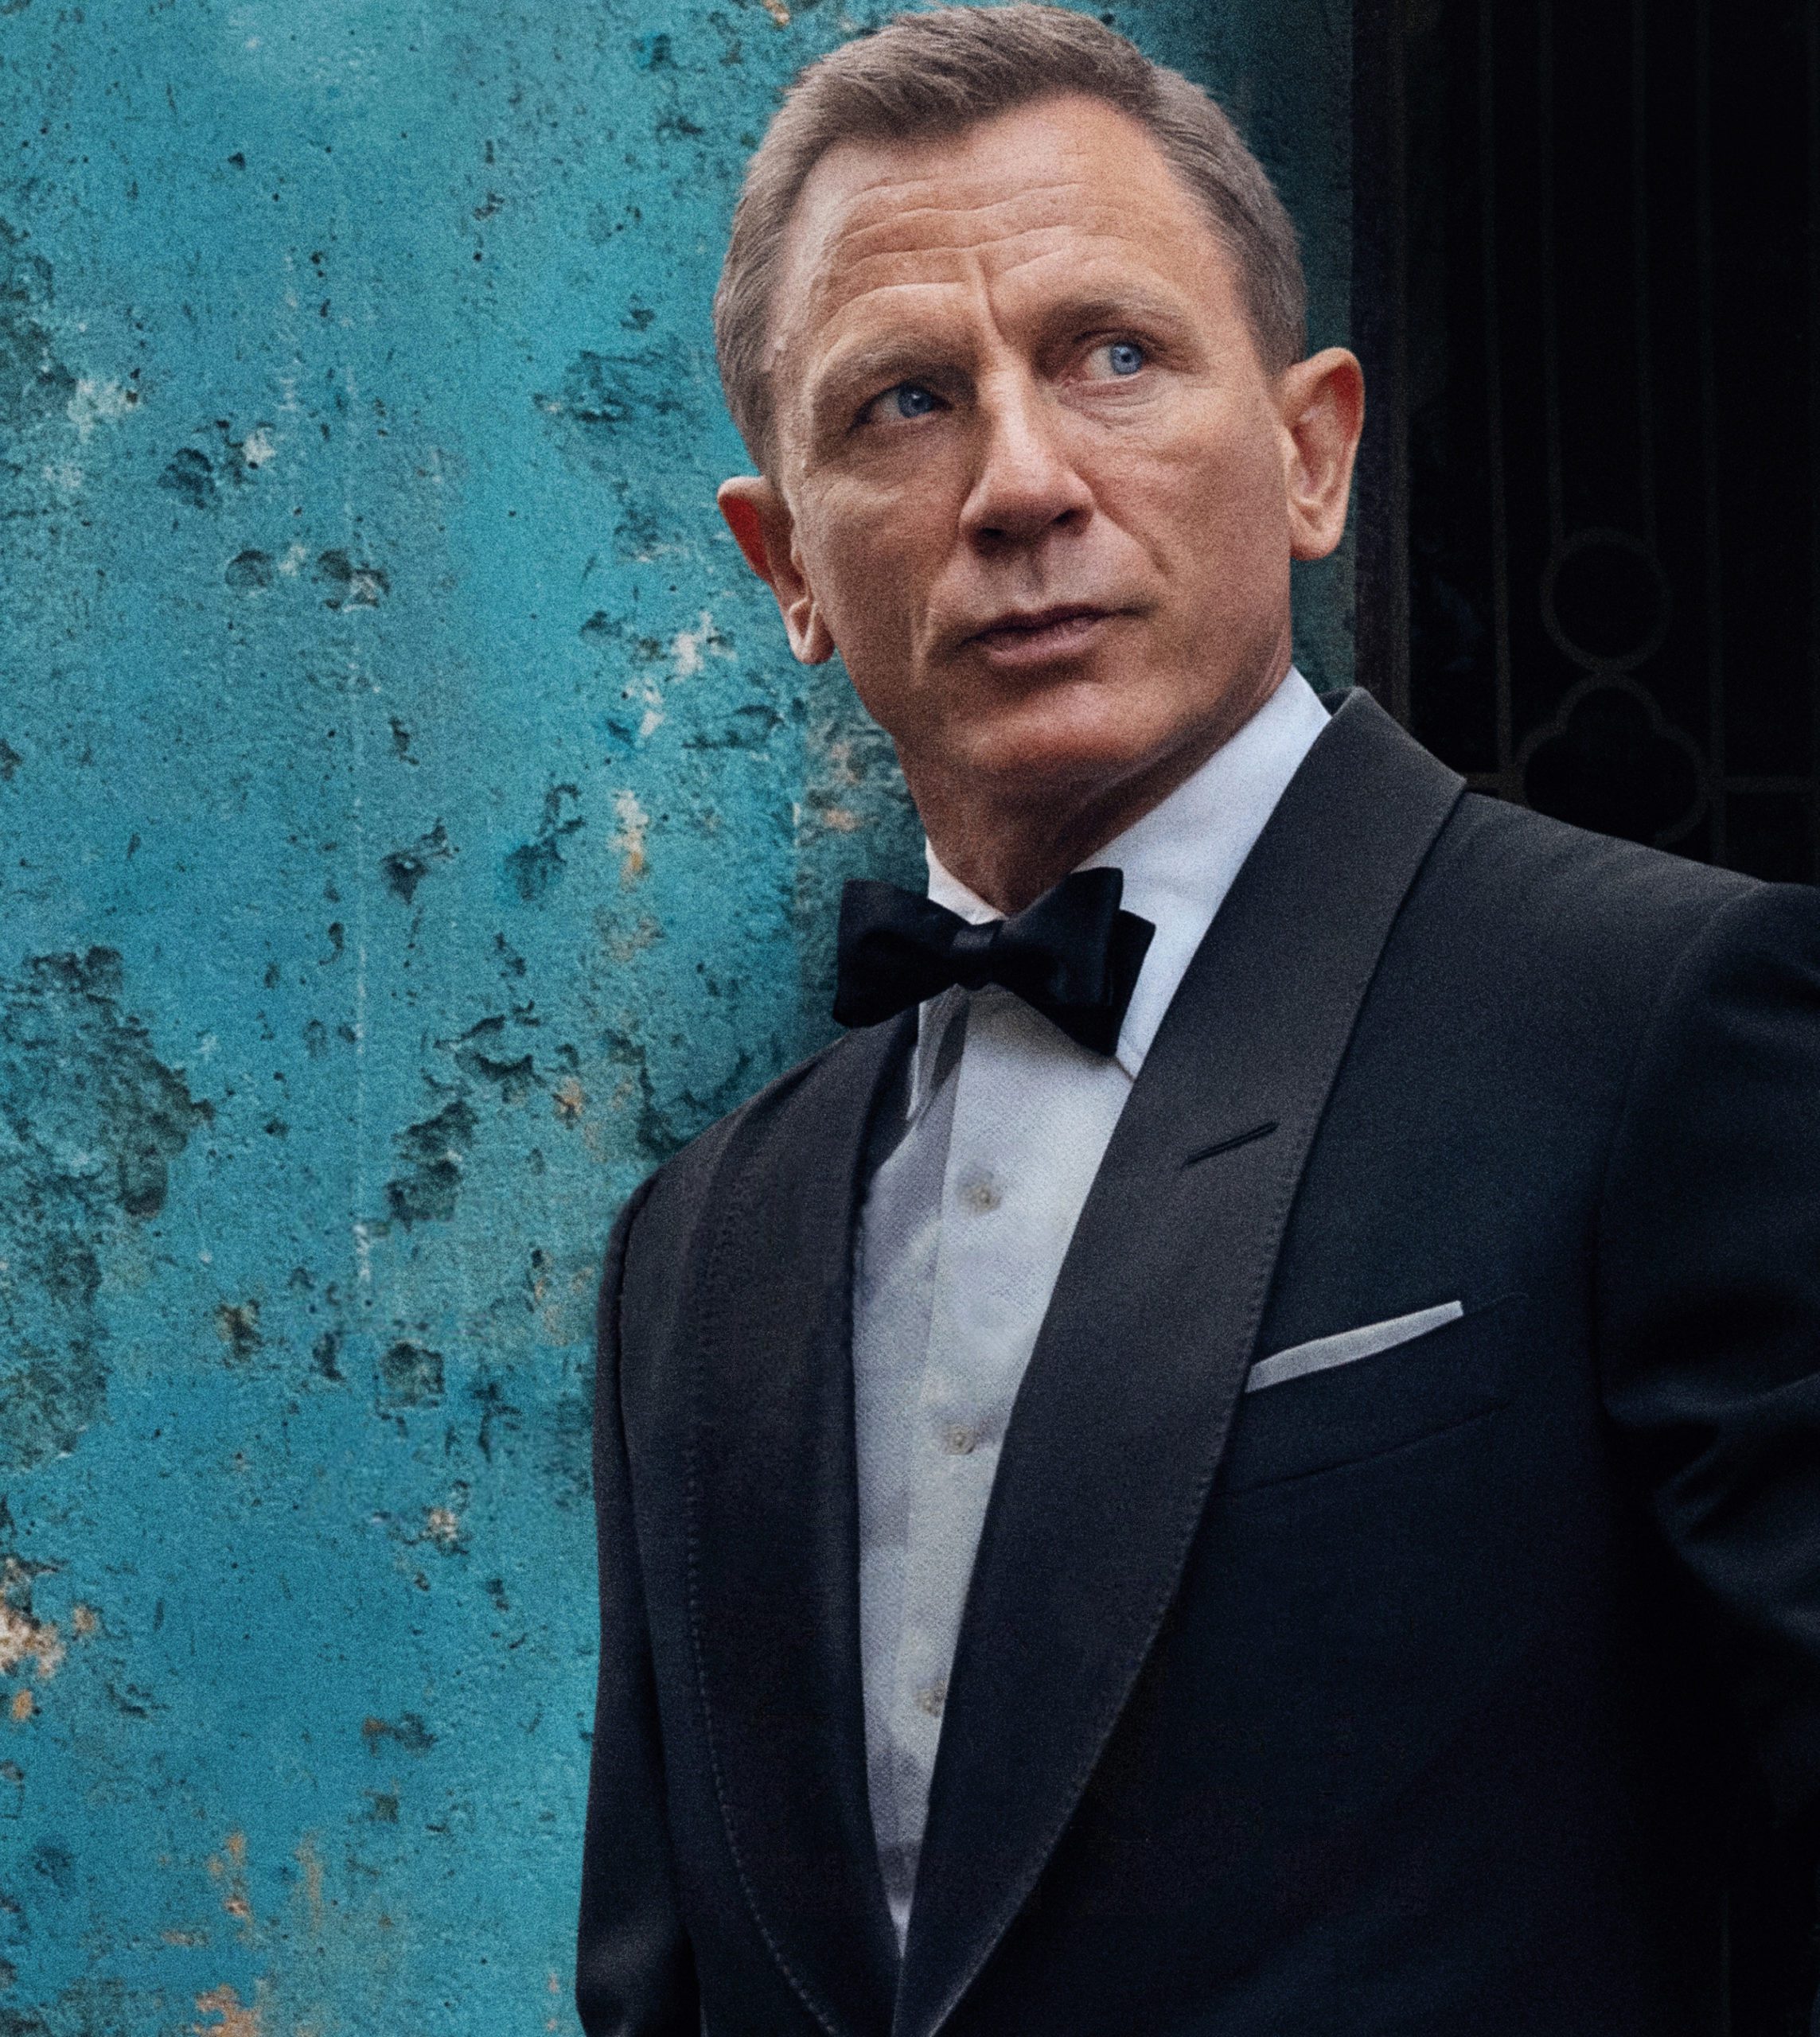 20 facts you never knew about James Bond